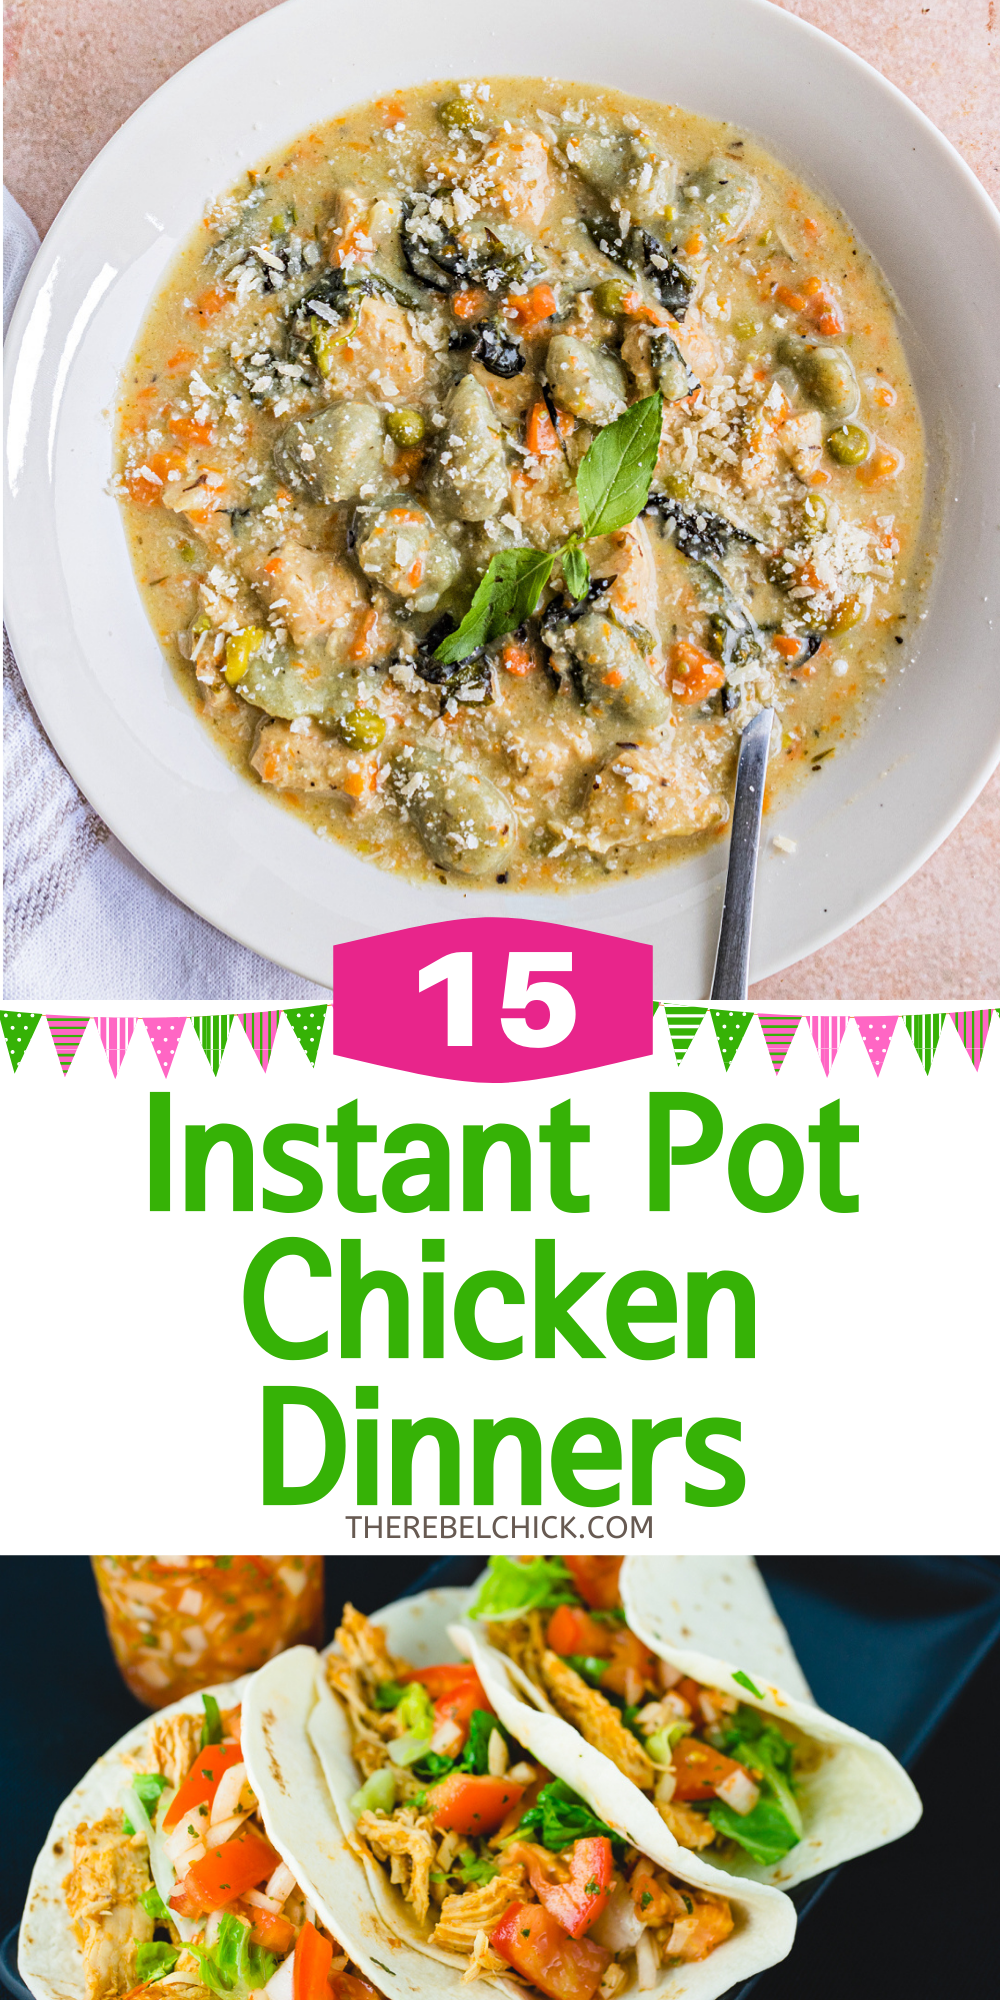 Check out these amazing 15 Instant Pot Chicken Recipes to Try!